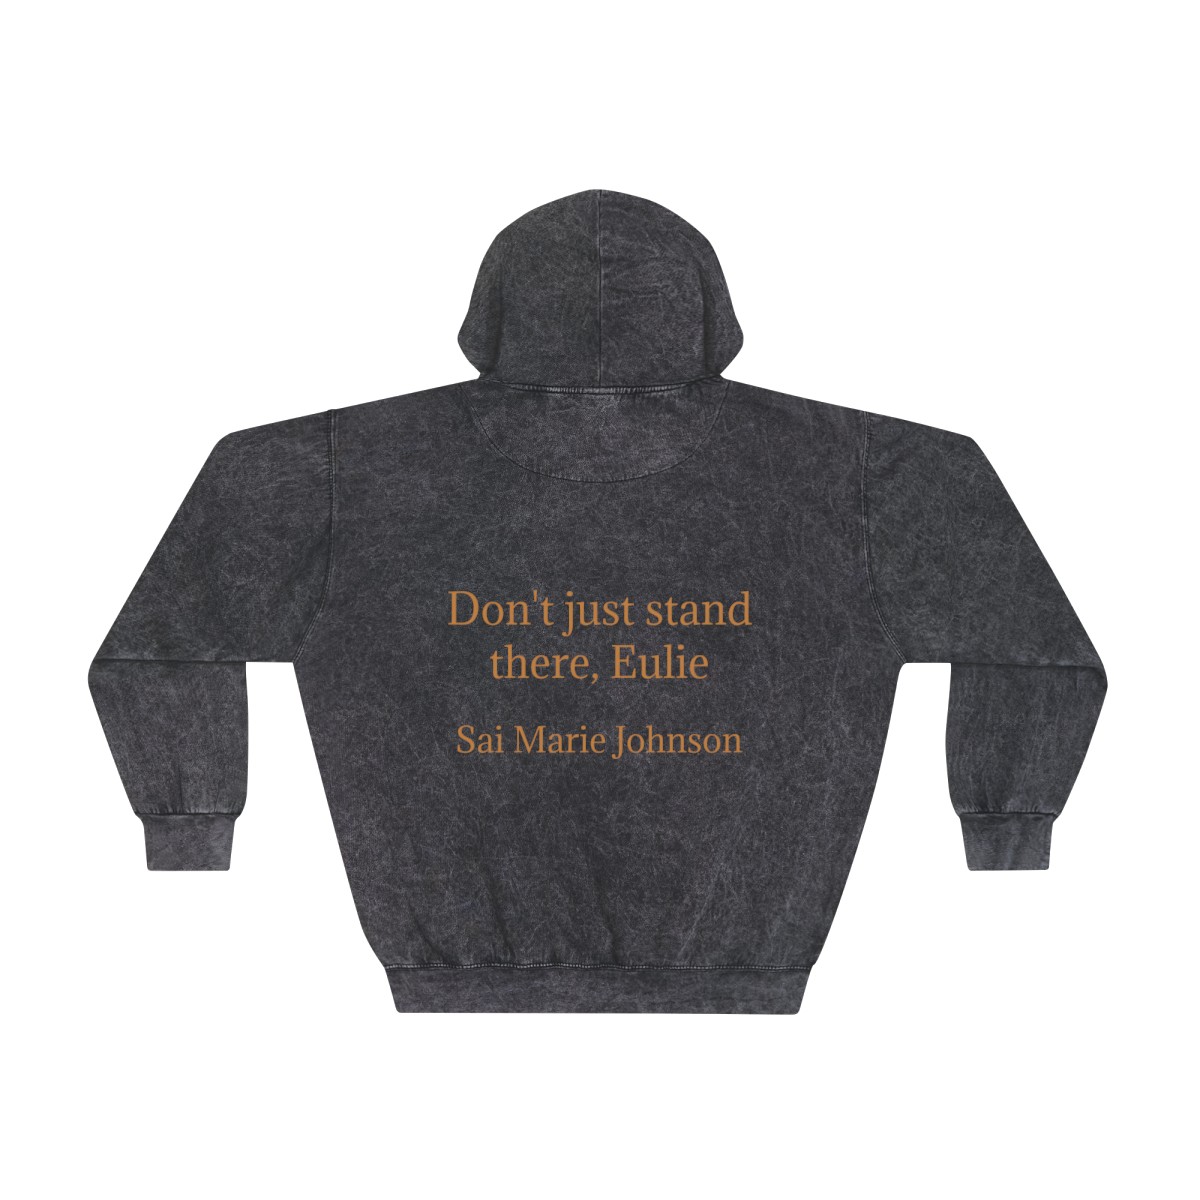 DANCE WITH DARKNESS Unisex Mineral Wash Hoodie product thumbnail image